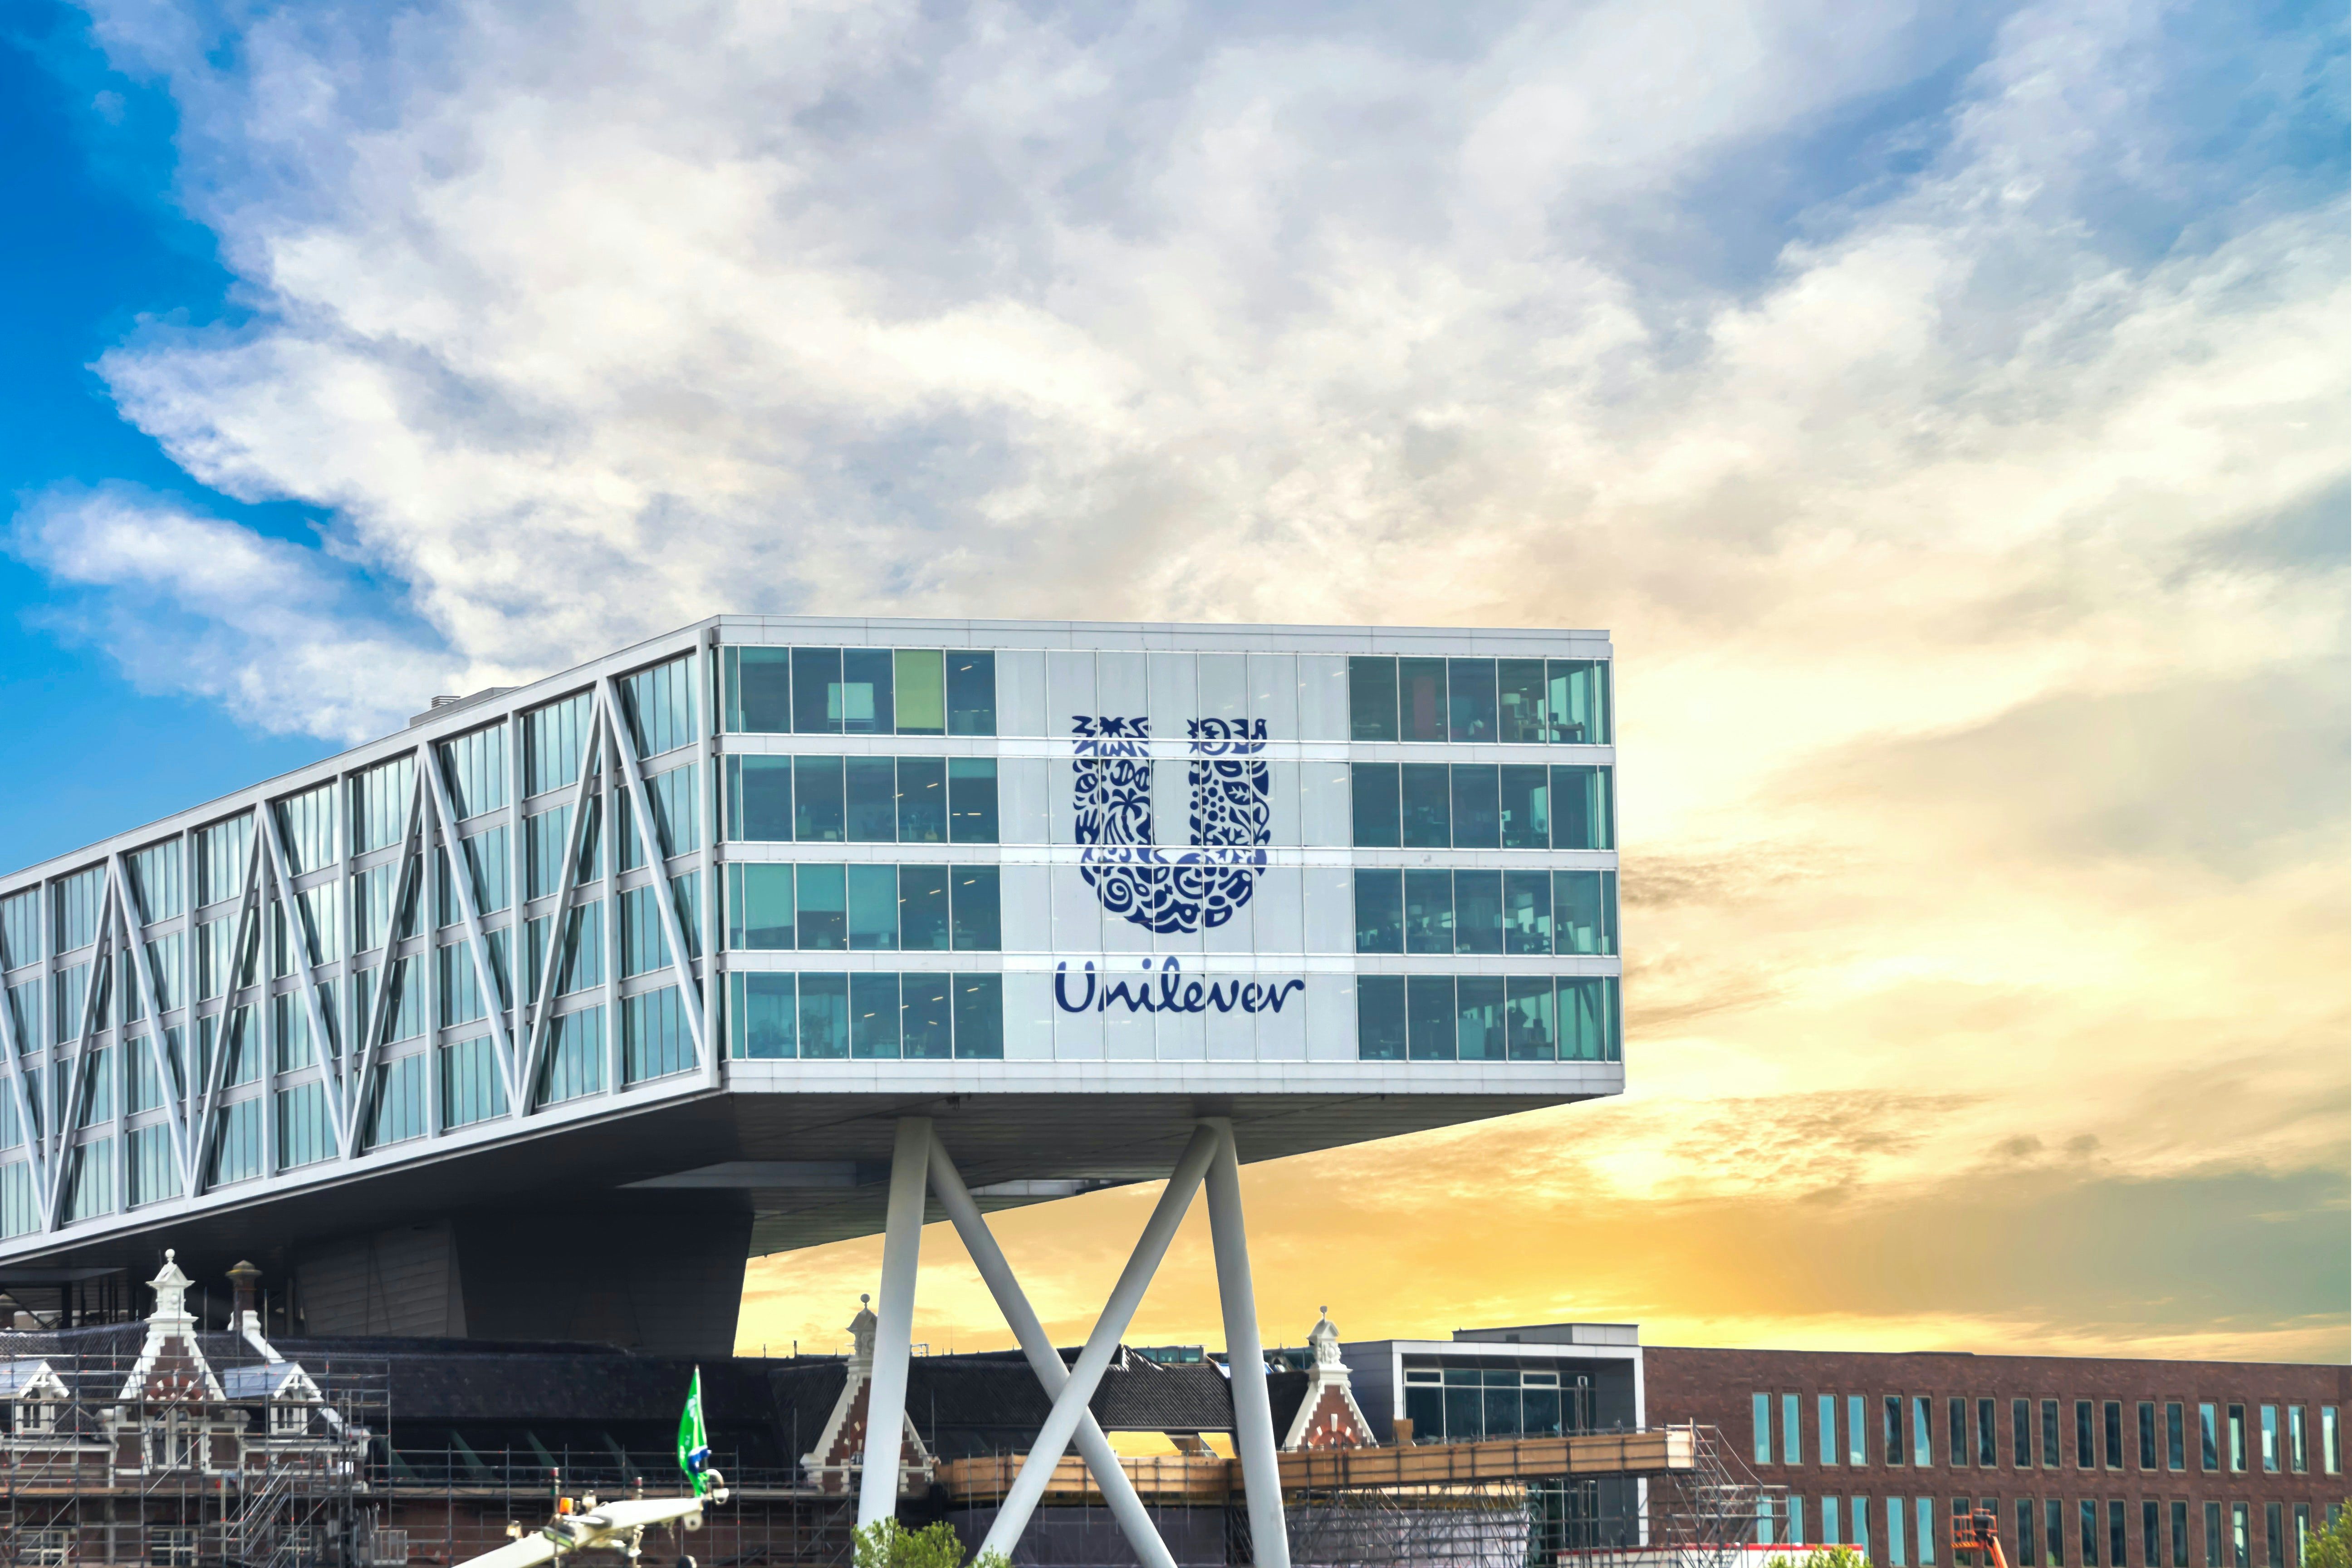 The Unilever offices in Rotterdam are built over an existing historical factory from 1891 and are designed by architect Chris de Jonge. Shutterstock.